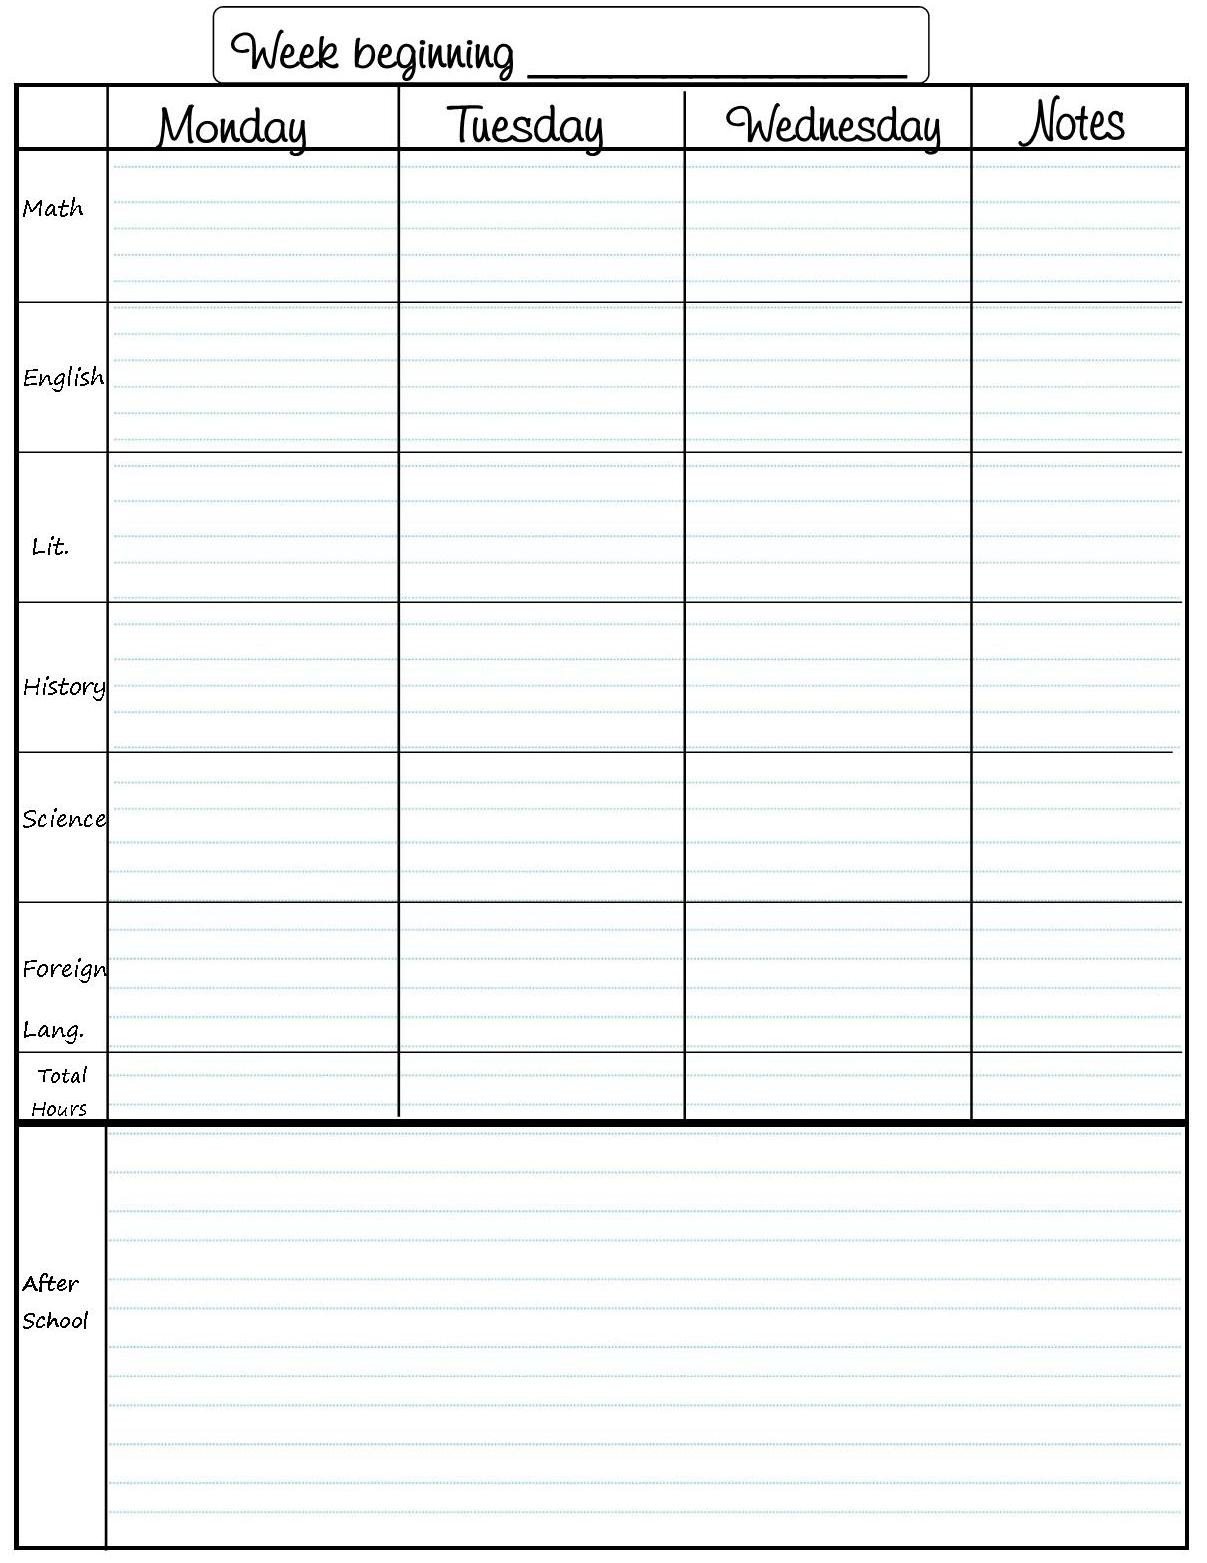 Student Planner Template Free Printable